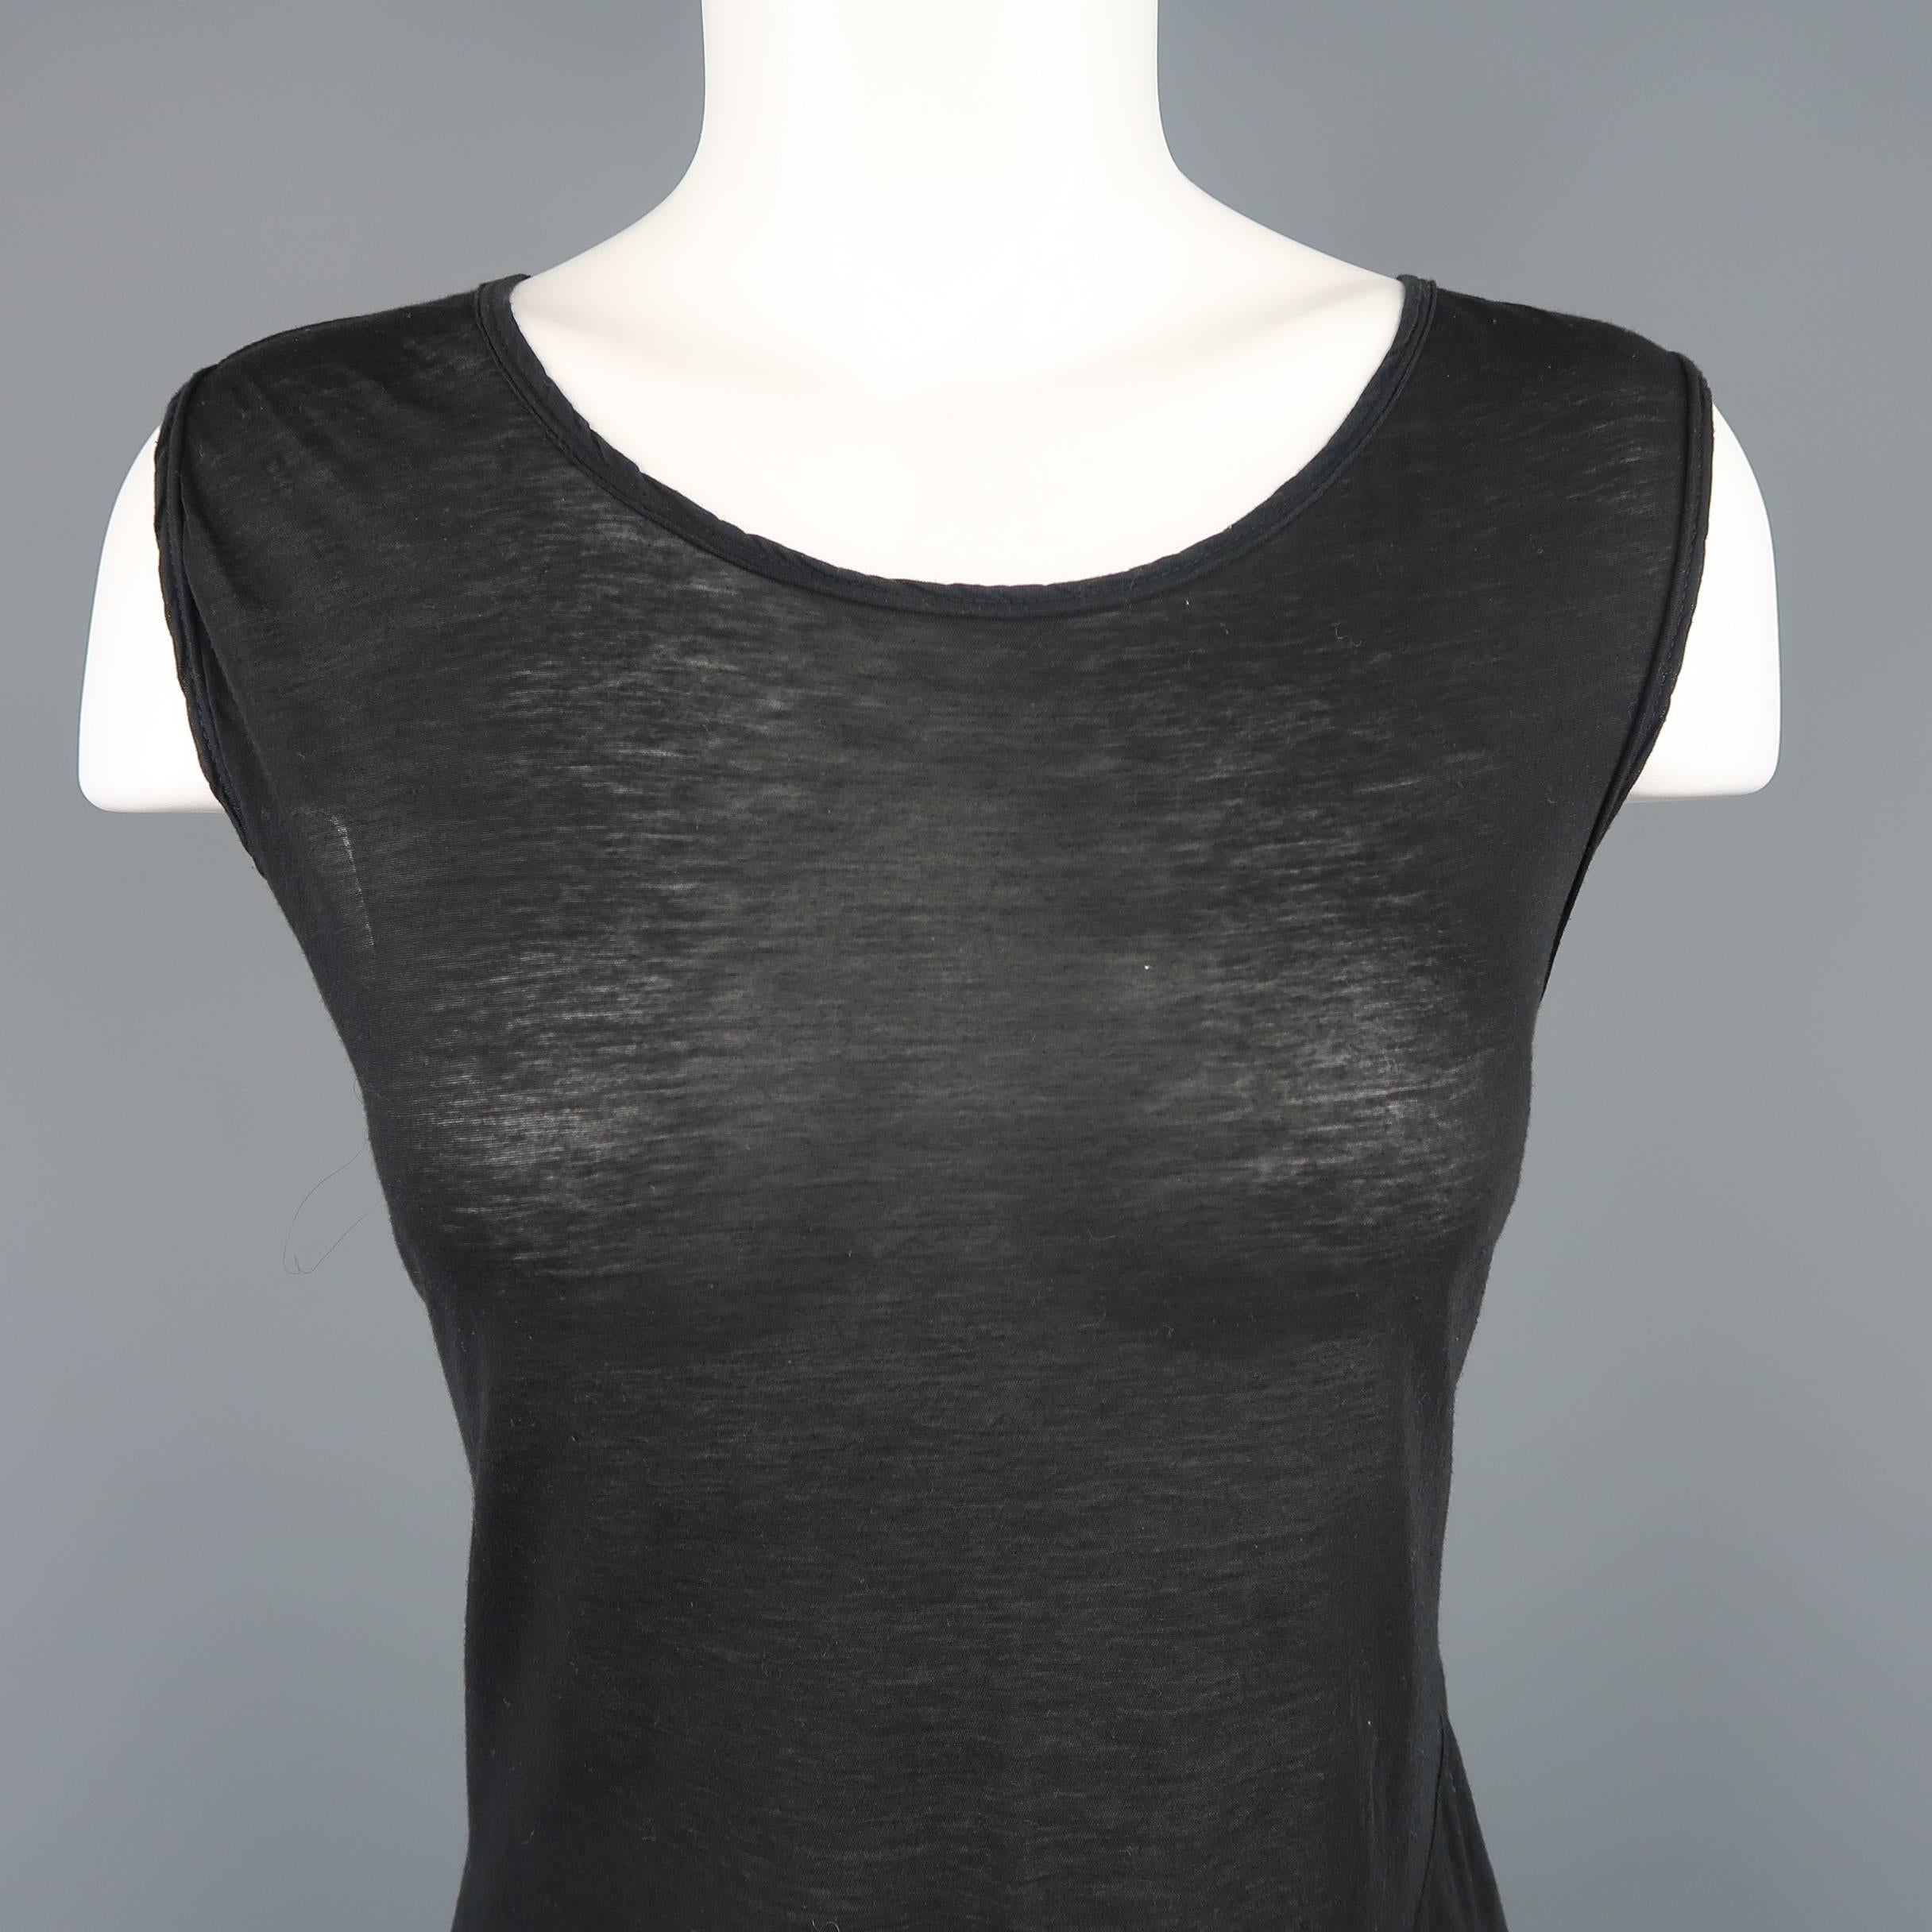 DRKSHDW by RICK OWENS tanks comes in black silk blend burnout jersey with diagonal seams and a scoop neck. Made in Italy.
 
Good Pre-Owned Condition.
Marked: (no size)
 
Measurements:
 
Shoulder: 16 in.
Bust: 38 in.
Length: 31 in.
